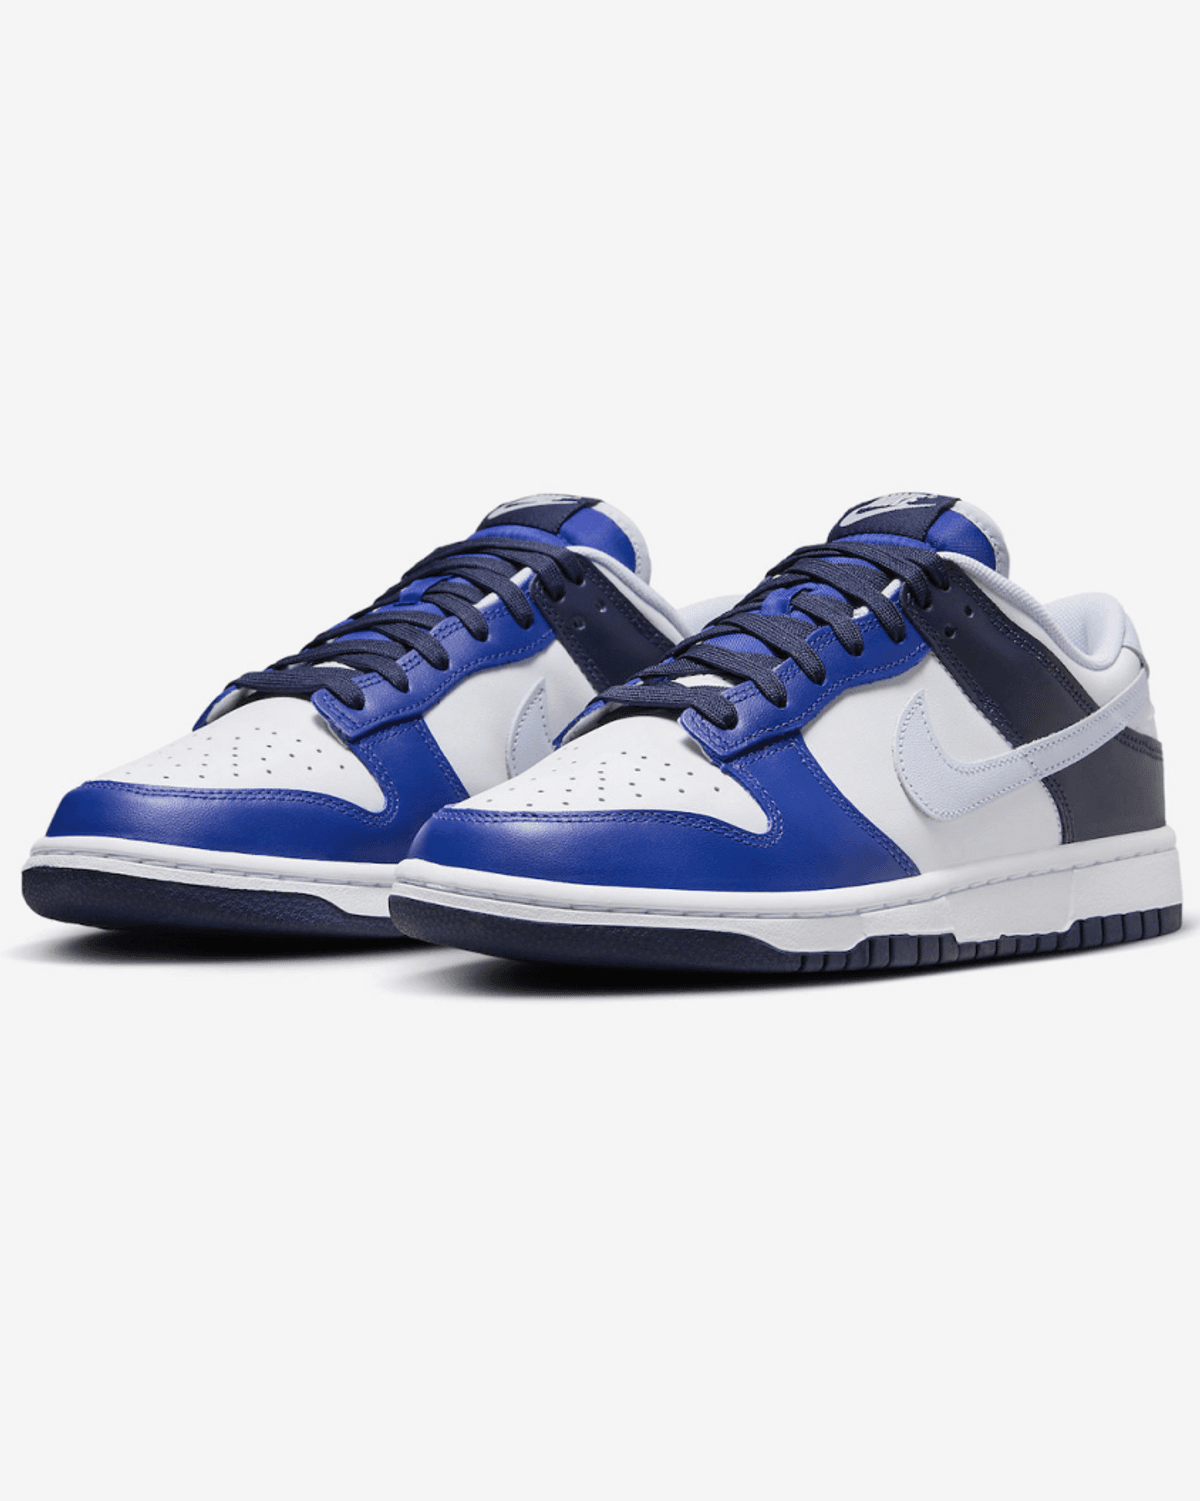 The Nike Dunk Low Game Royal/Midnight Navy Is Scheduled For A 2023 Release